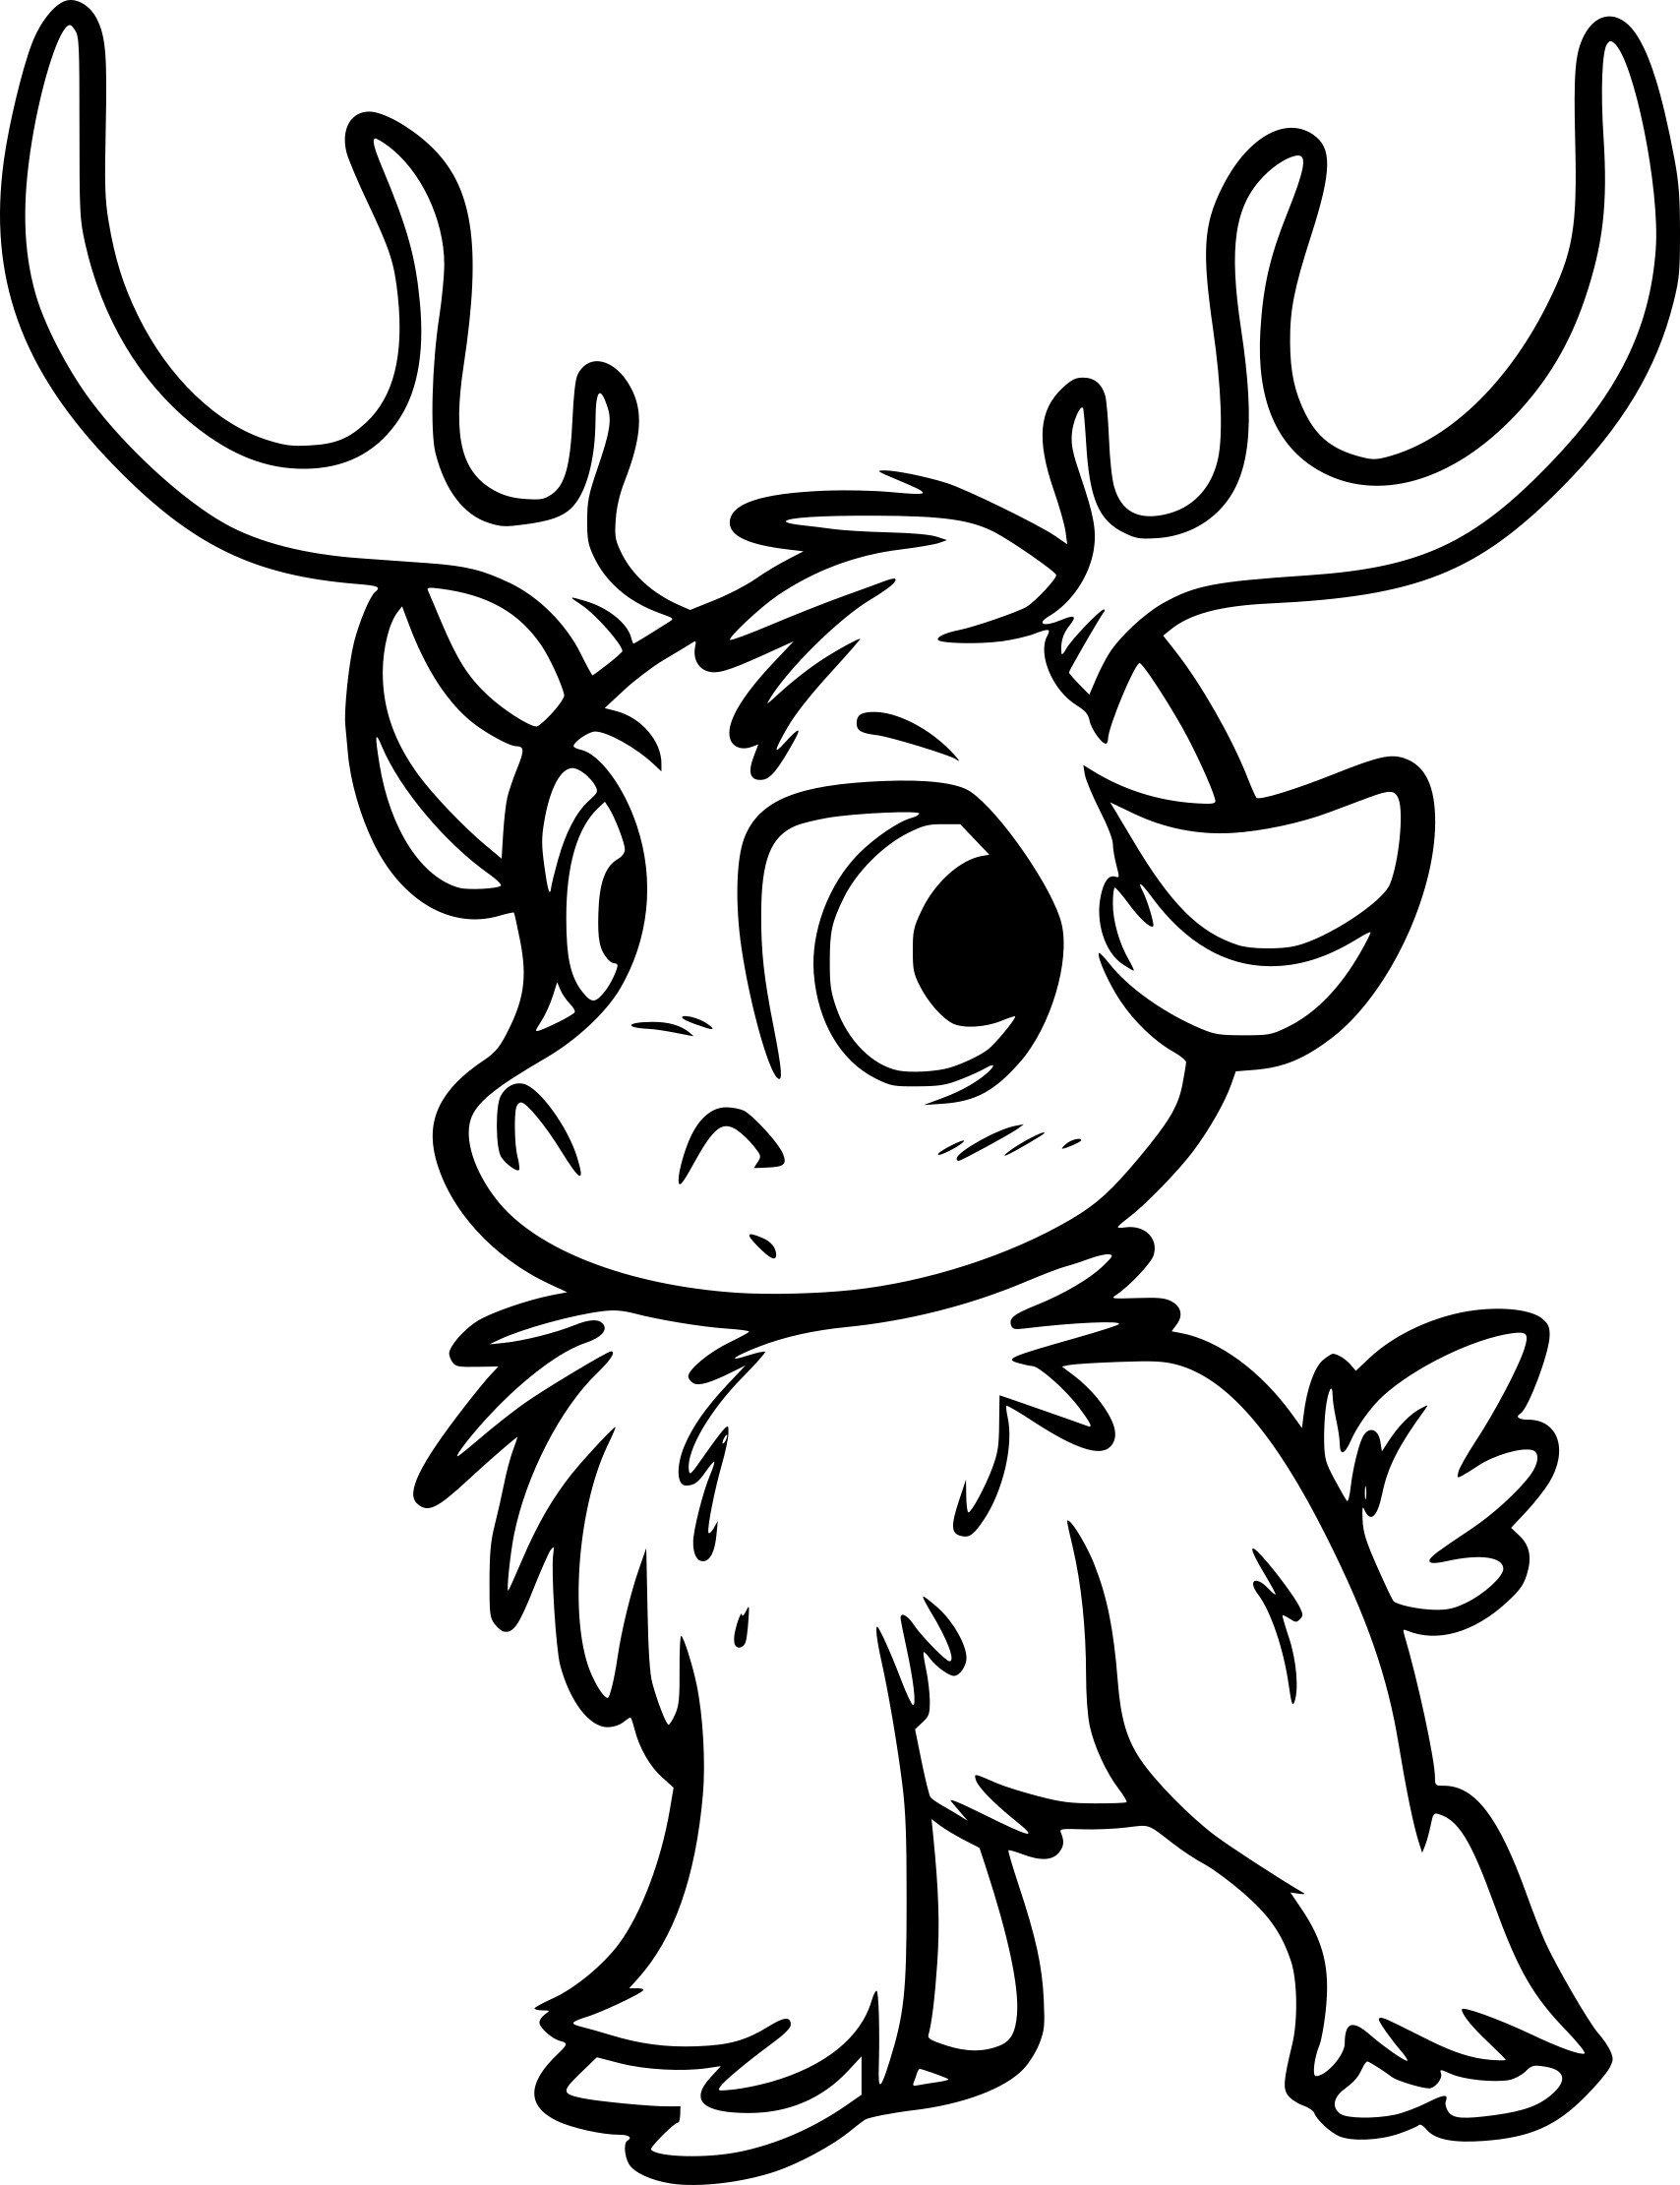 The Reindeer Sven coloring page